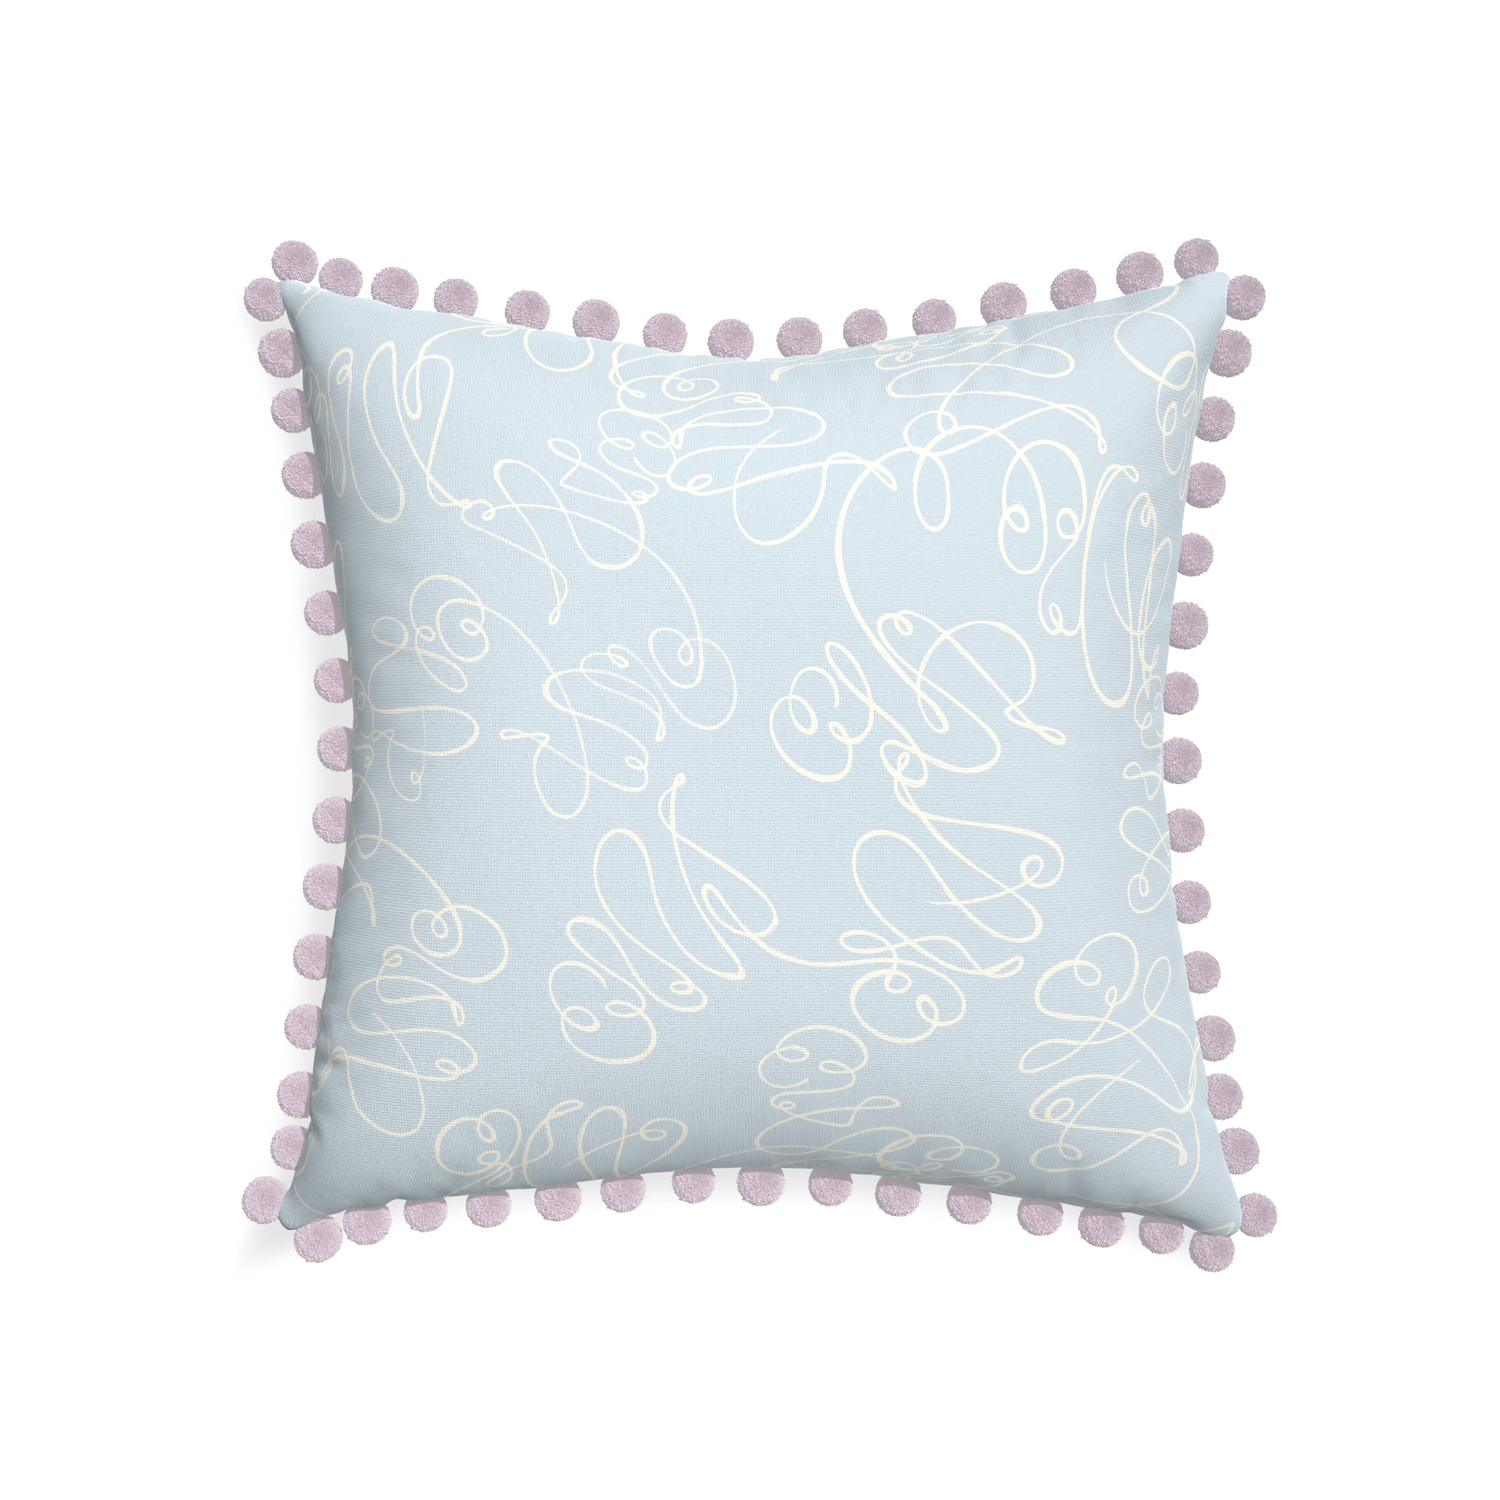 22-square mirabella custom powder blue abstractpillow with l on white background